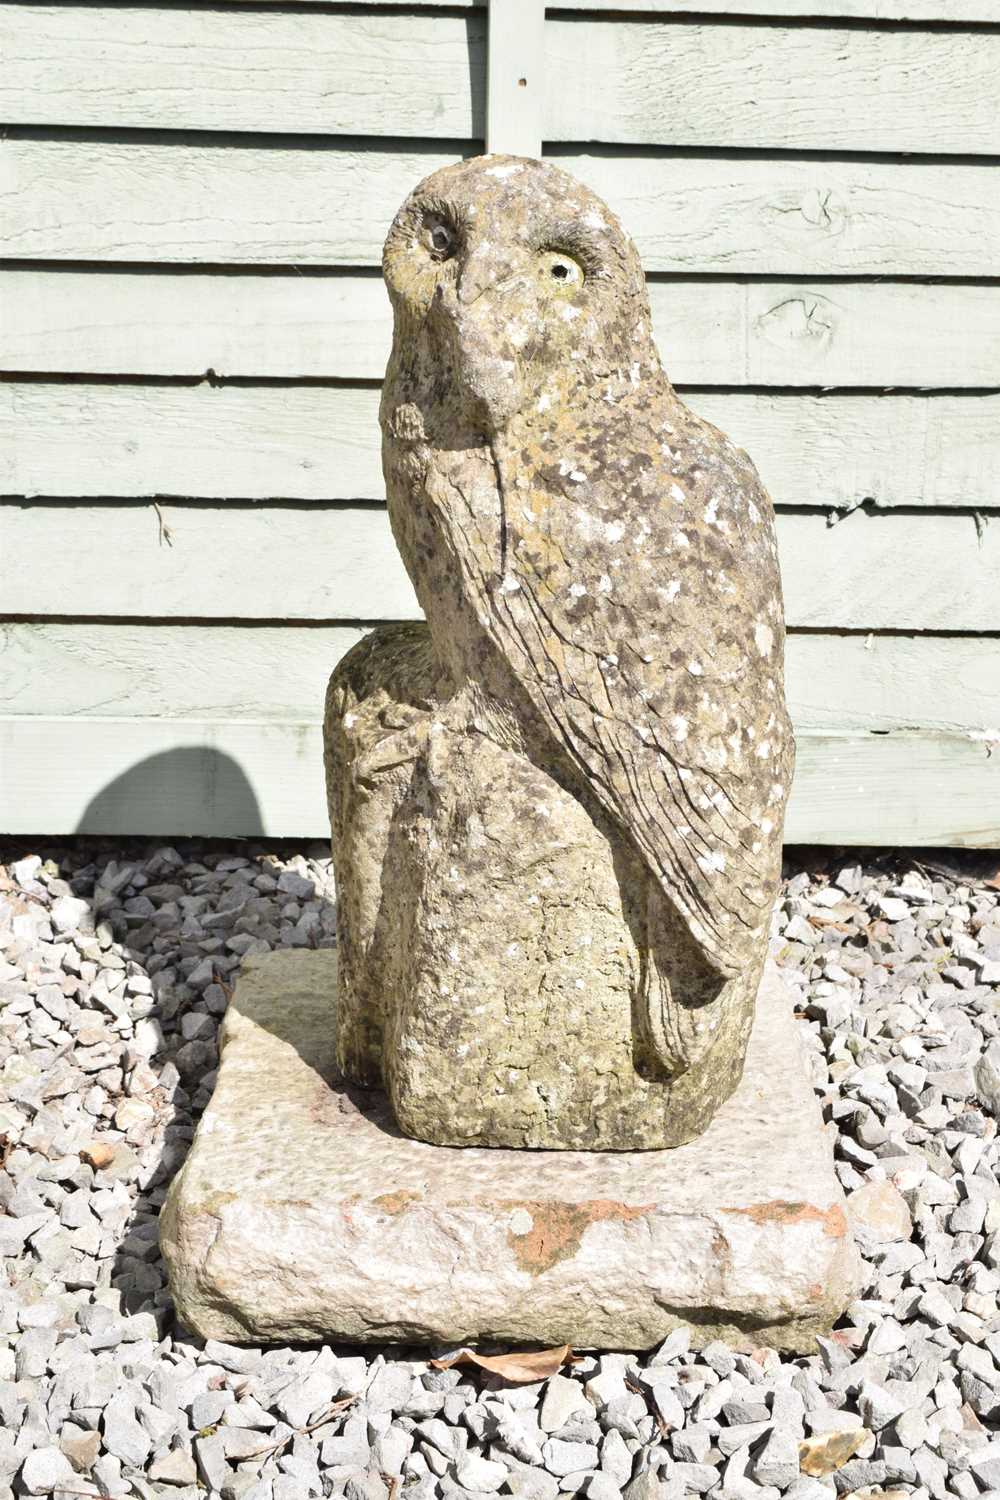 Composition stone garden ornament of a perched owl - Image 2 of 4